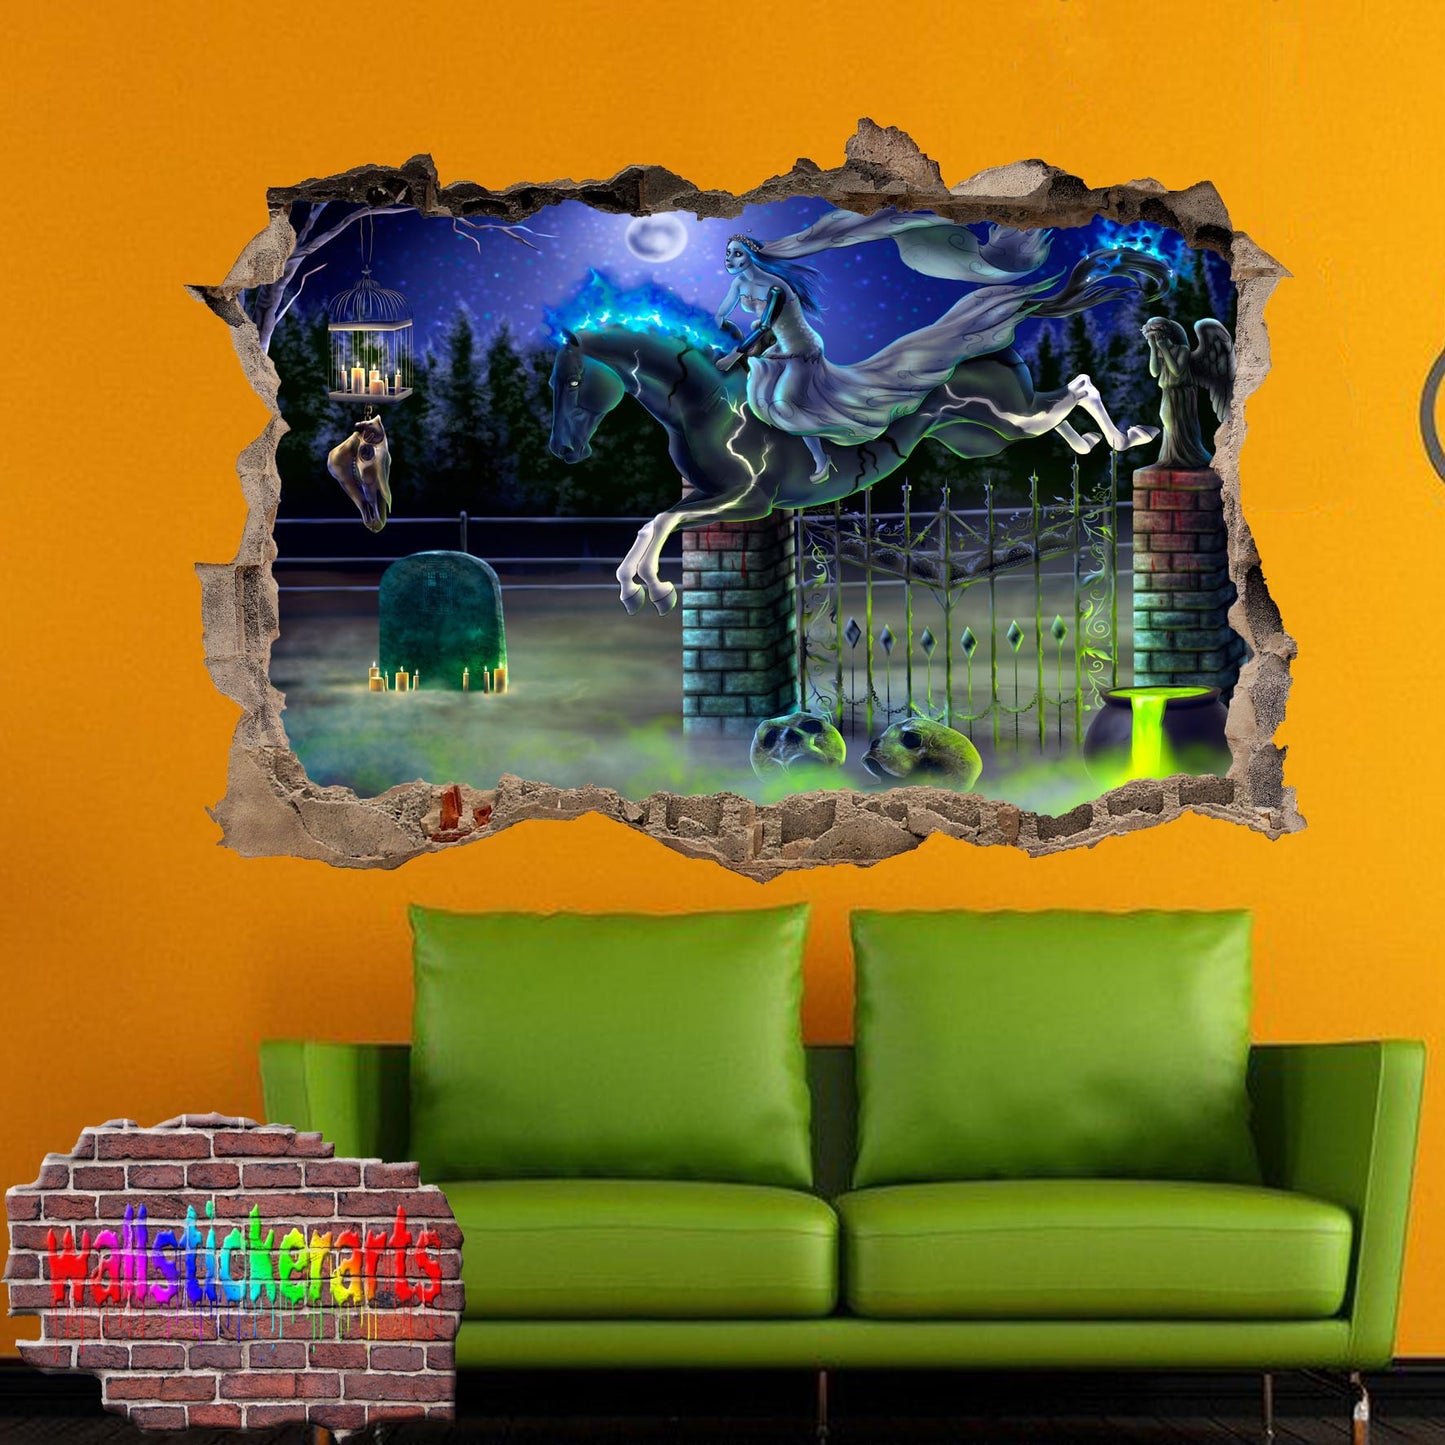 Gothic Graveyard Goth Girl 3d Smashed Wall Sticker Room Decoration Decal Mural